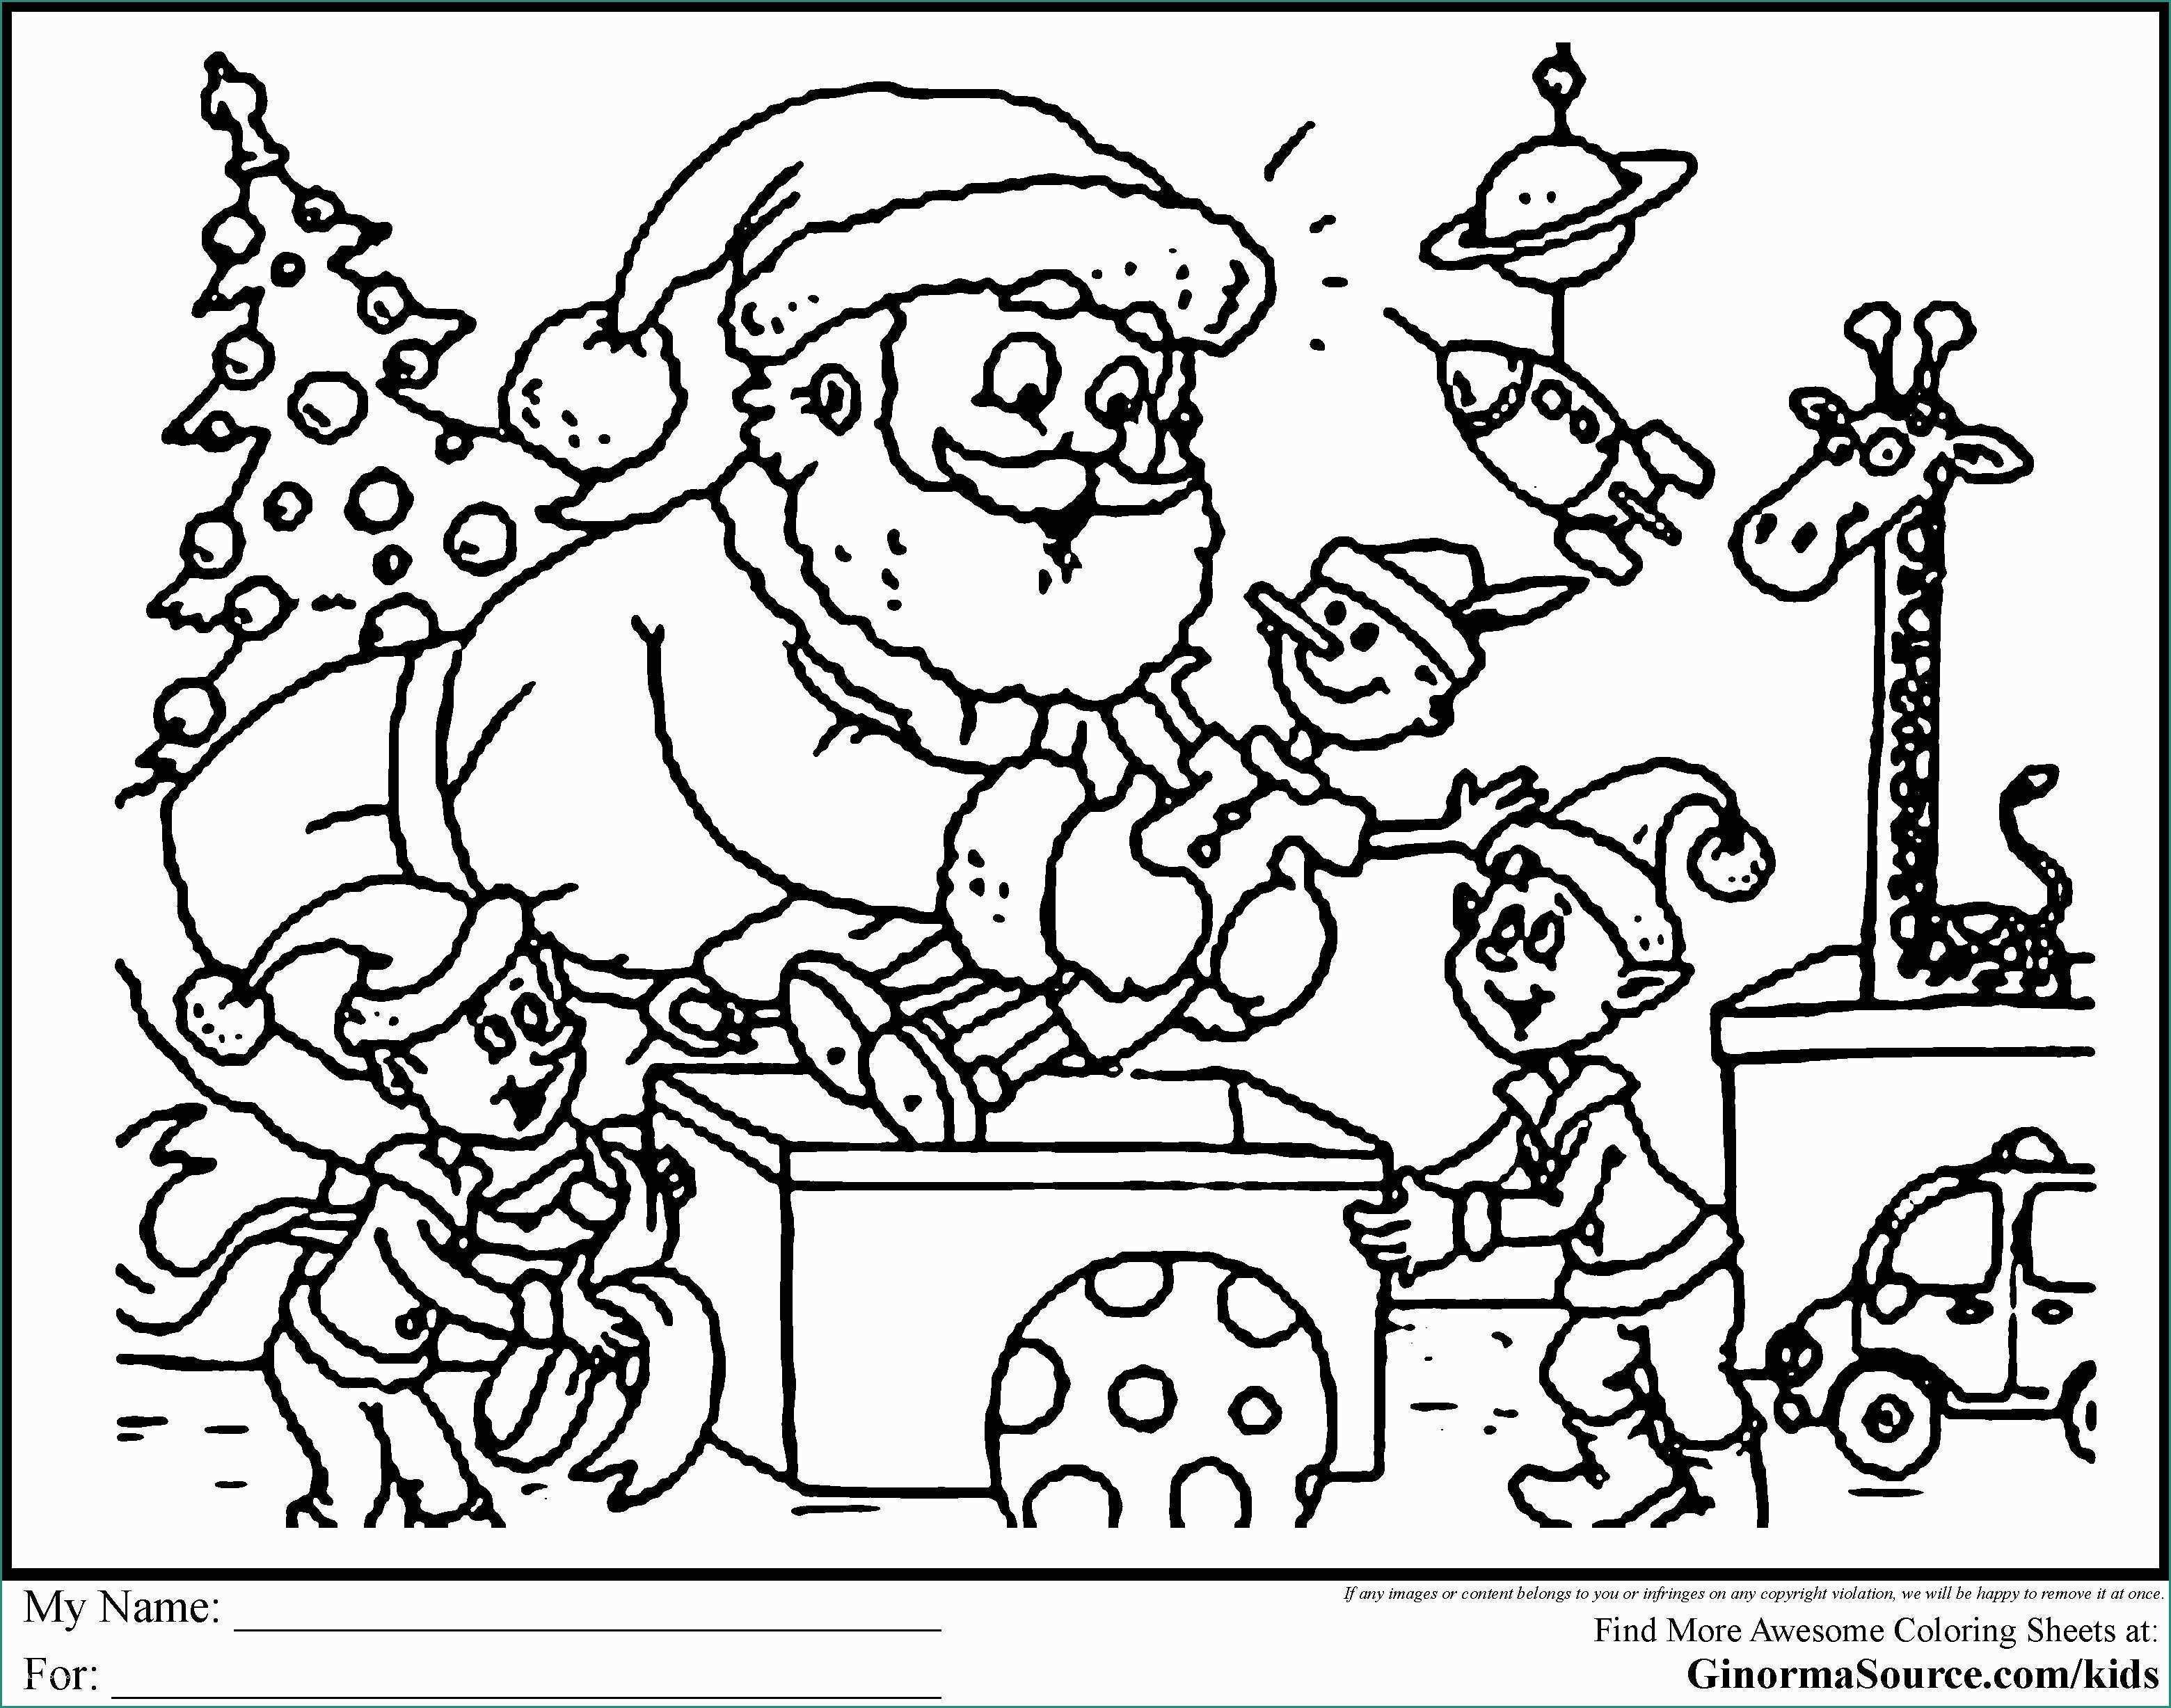 Rimuovere Sweet Page E Elf Coloring Pages for Adults Elf Coloring Pages Gallery